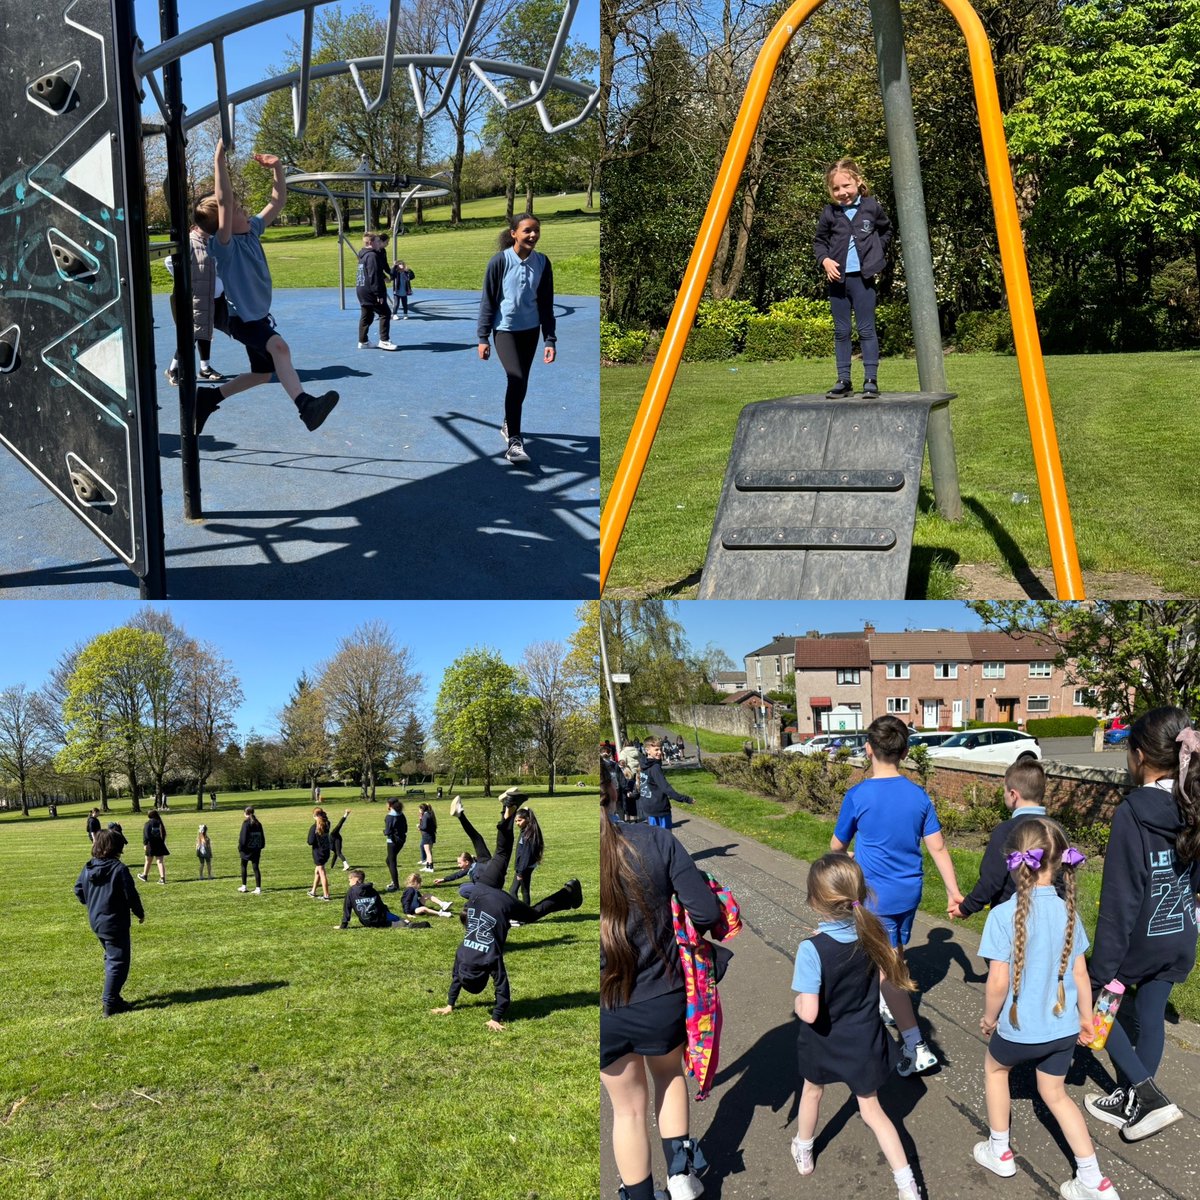 ☀️Rooms 1,2,10 and 11 had a lovely walk together to Overtoun Park this afternoon. We clocked up lots of steps and we even seen some ducks on our way to the park 🦆☀️ #BankheadWillSOAR #HealthWeek #BeActive